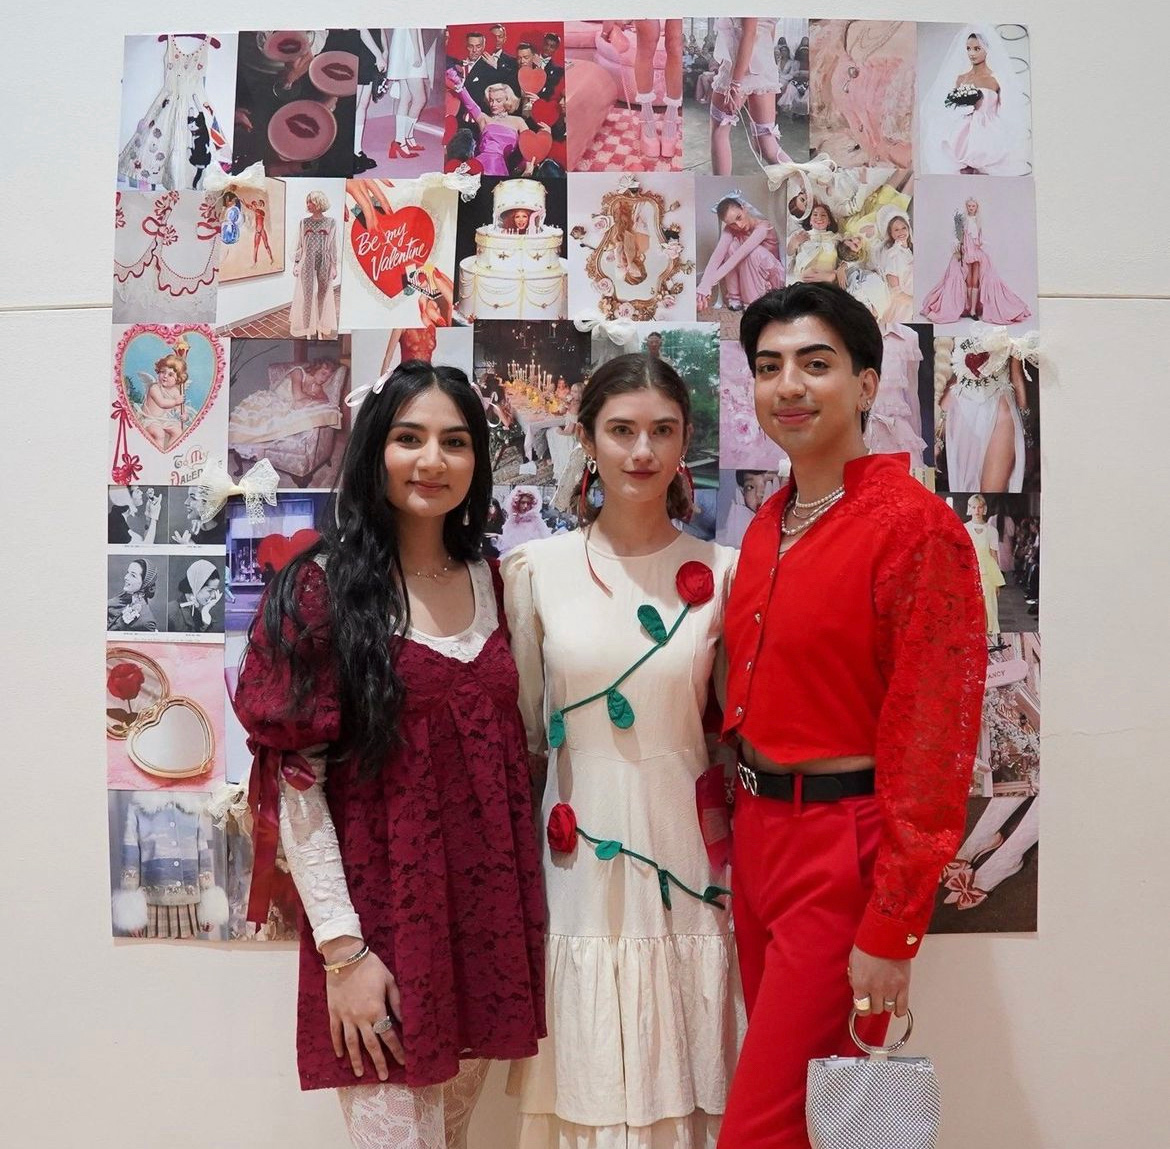 3 students standing in front of a photo wall collage